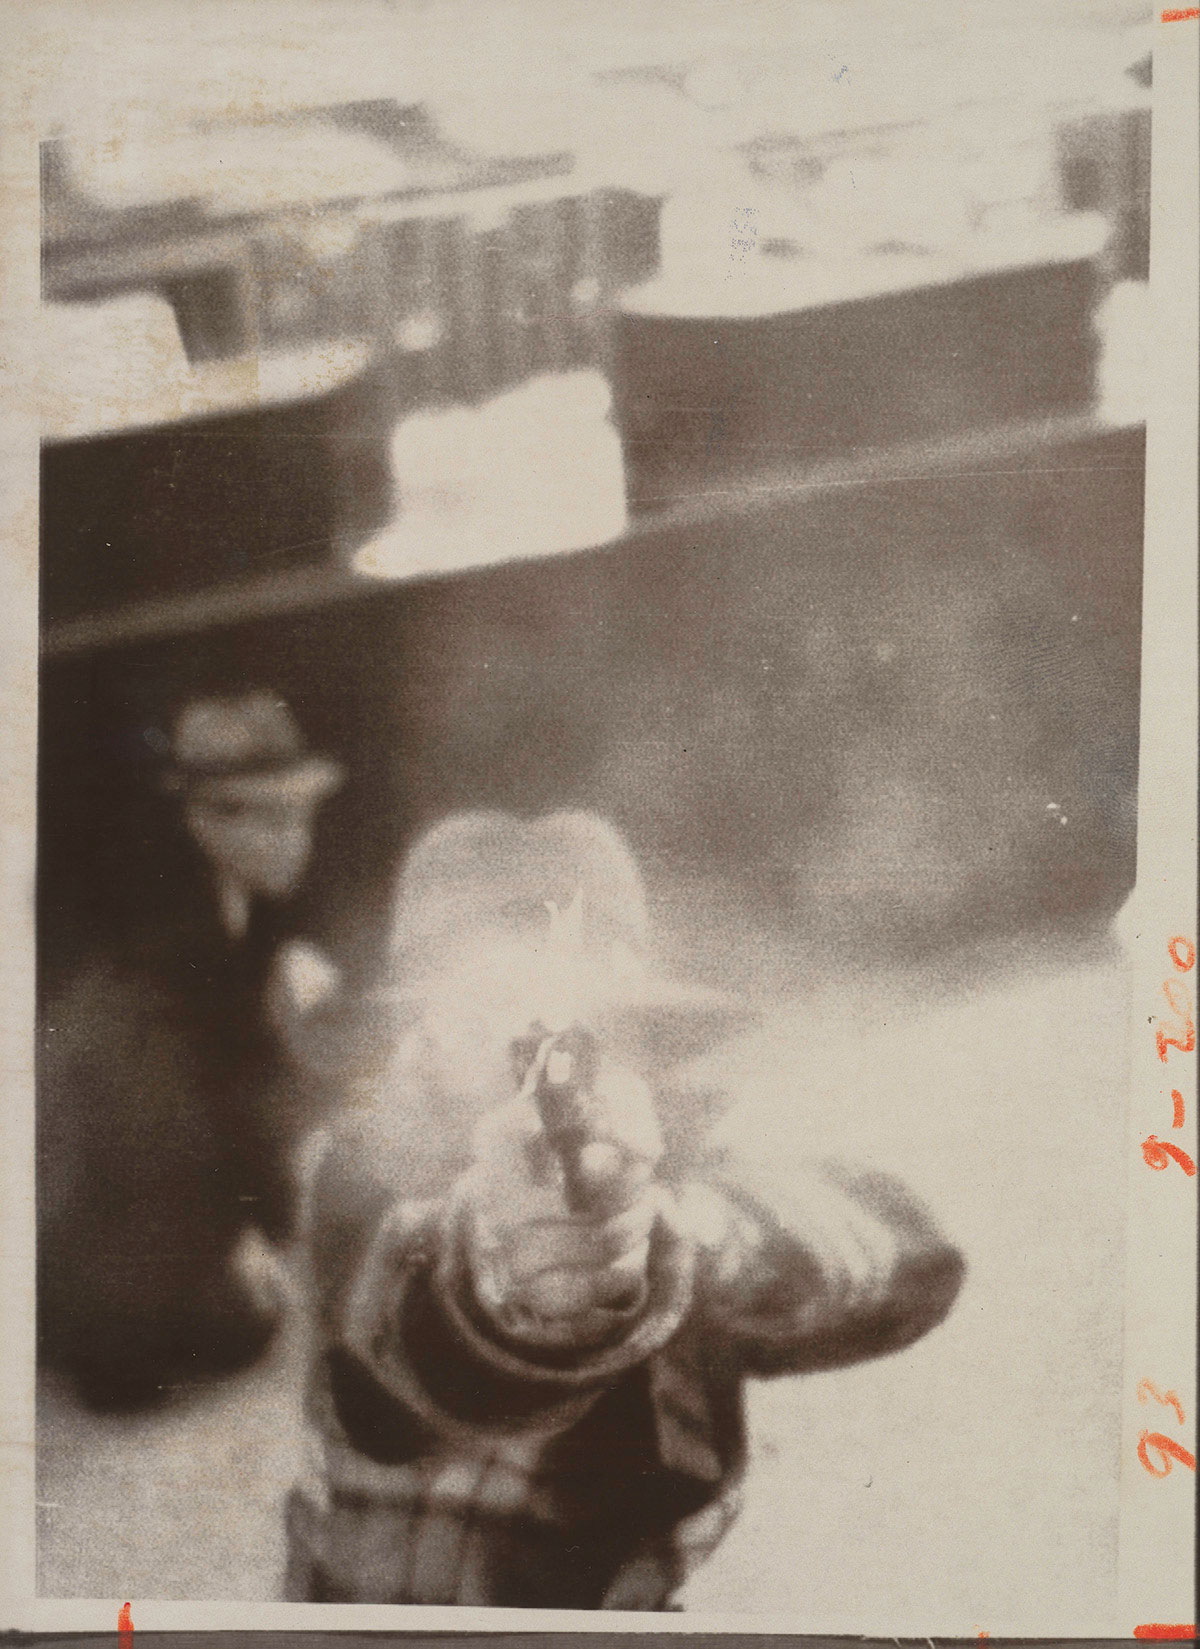 A bank robber aiming at a security camera, Cleveland, March 8, 1975